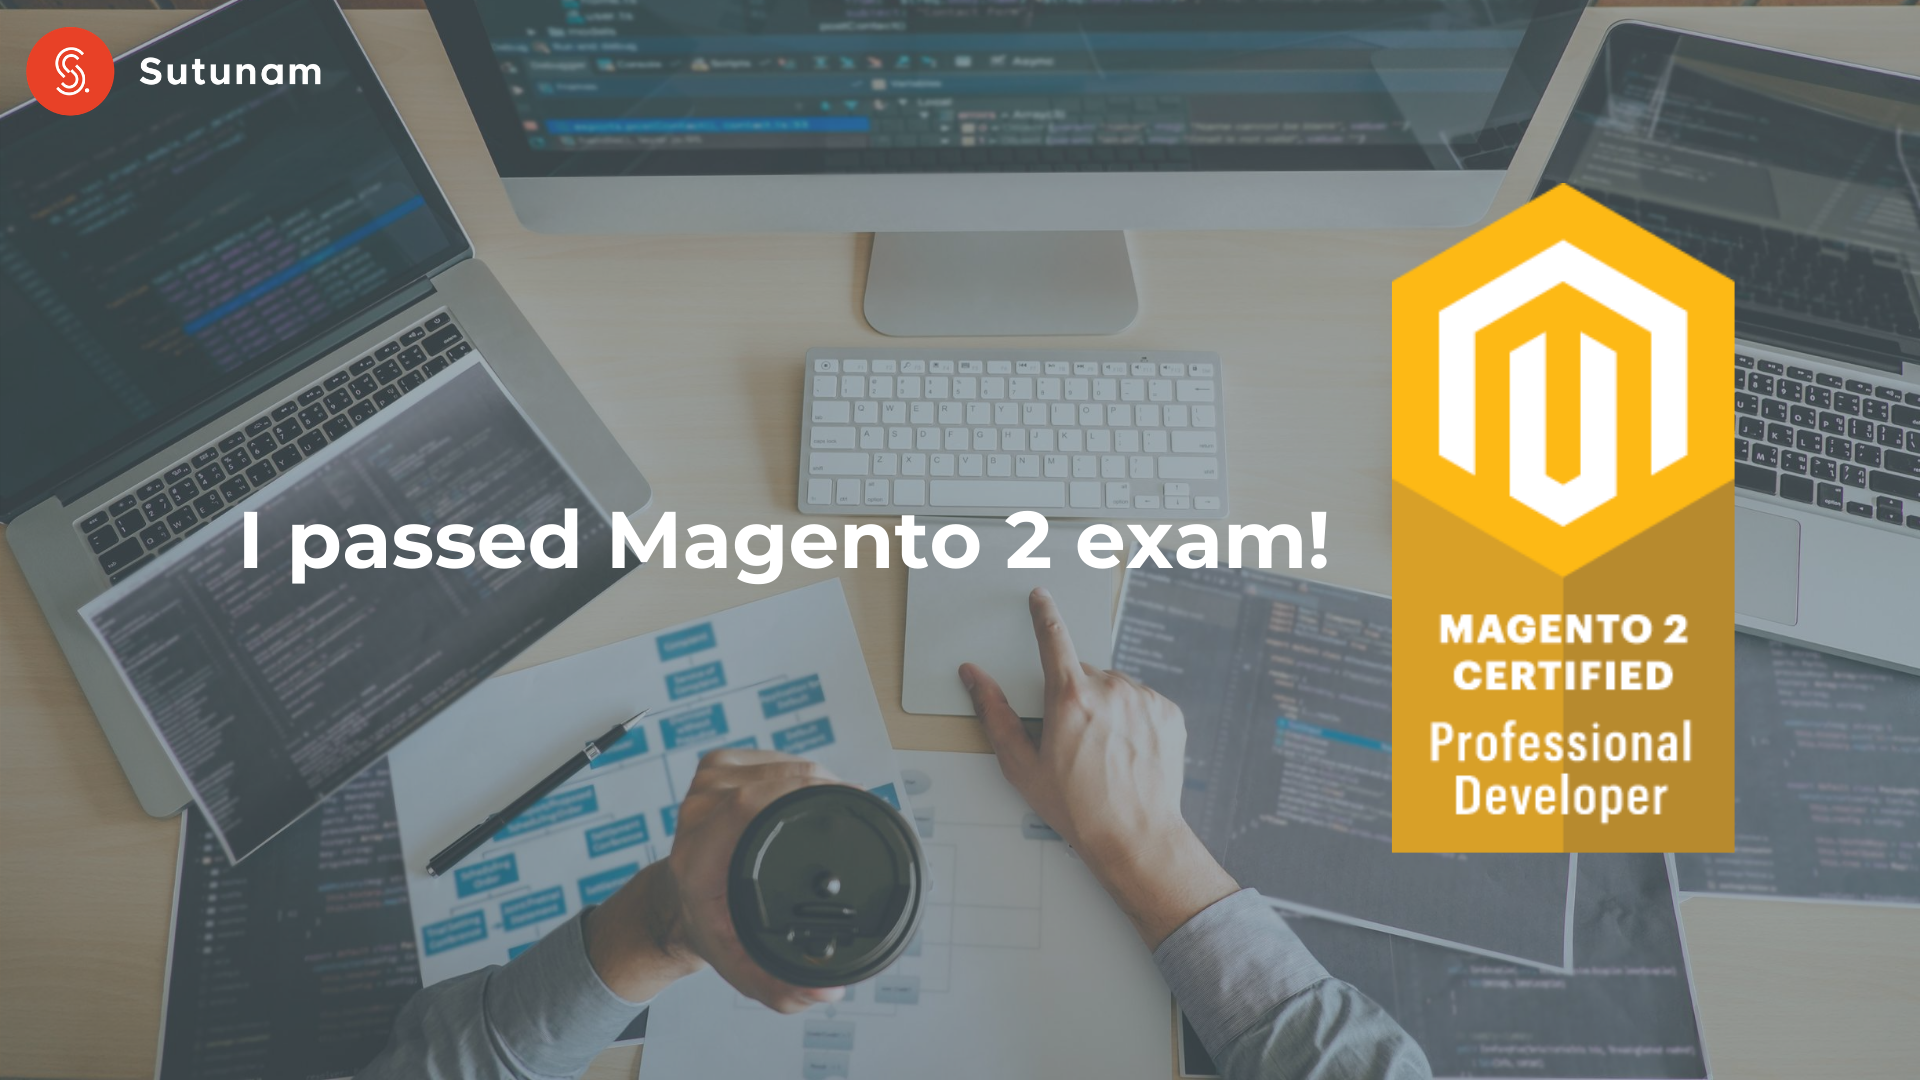 How to conquer Magento 2 Certification for Professional Developer